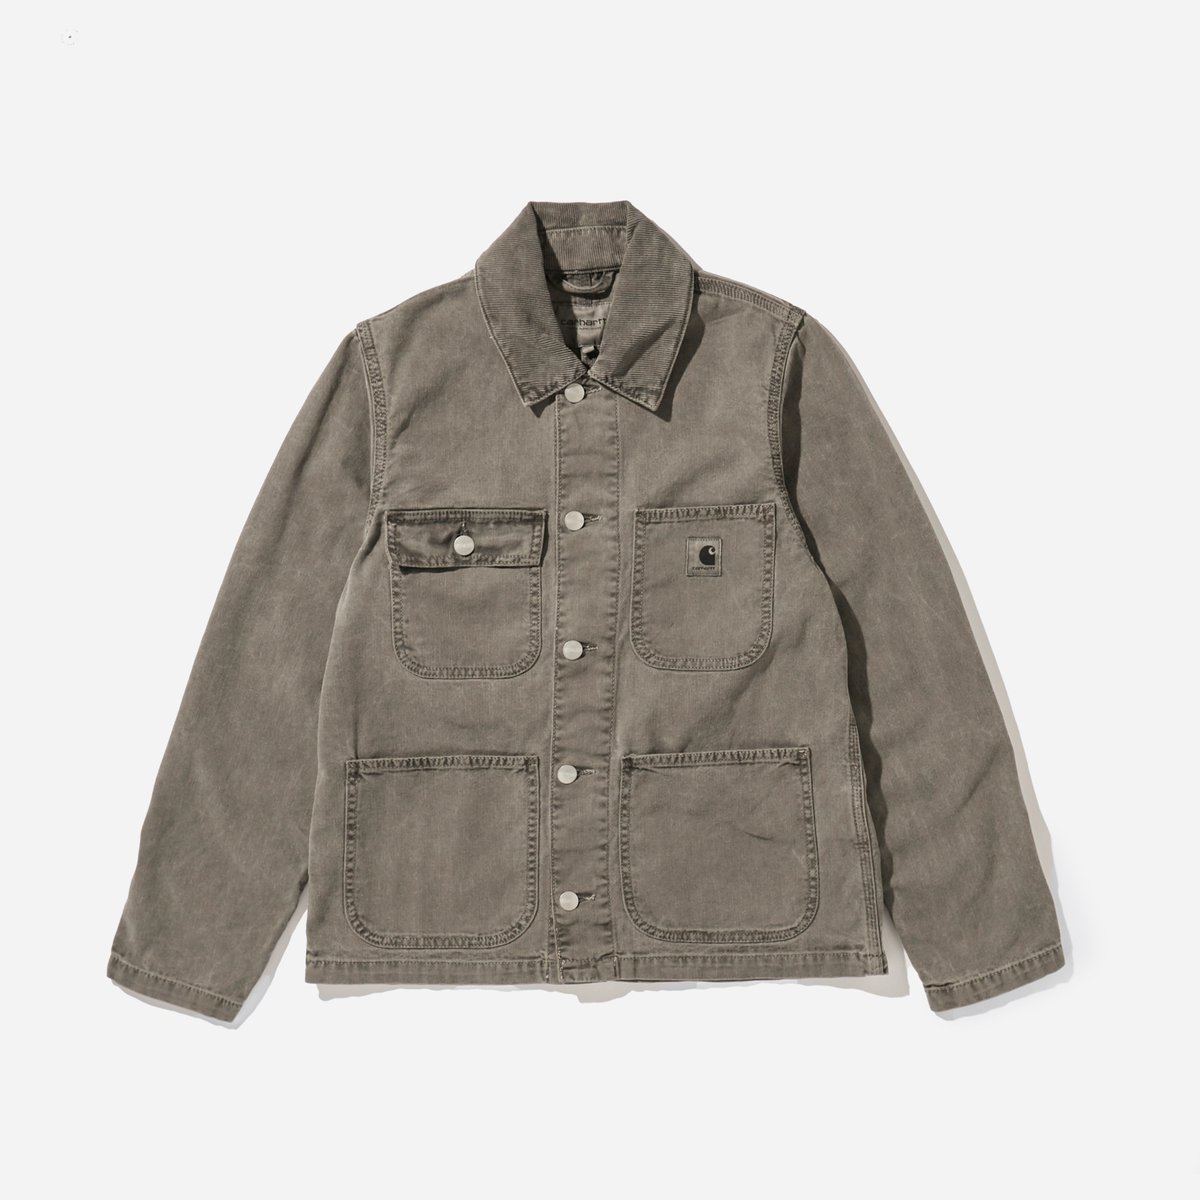 Womens outerwear picks for Spring from Folk and Carhartt WIP 🙌 bit.ly/3HwgA3s #HIP #Folk #CarharttWIP